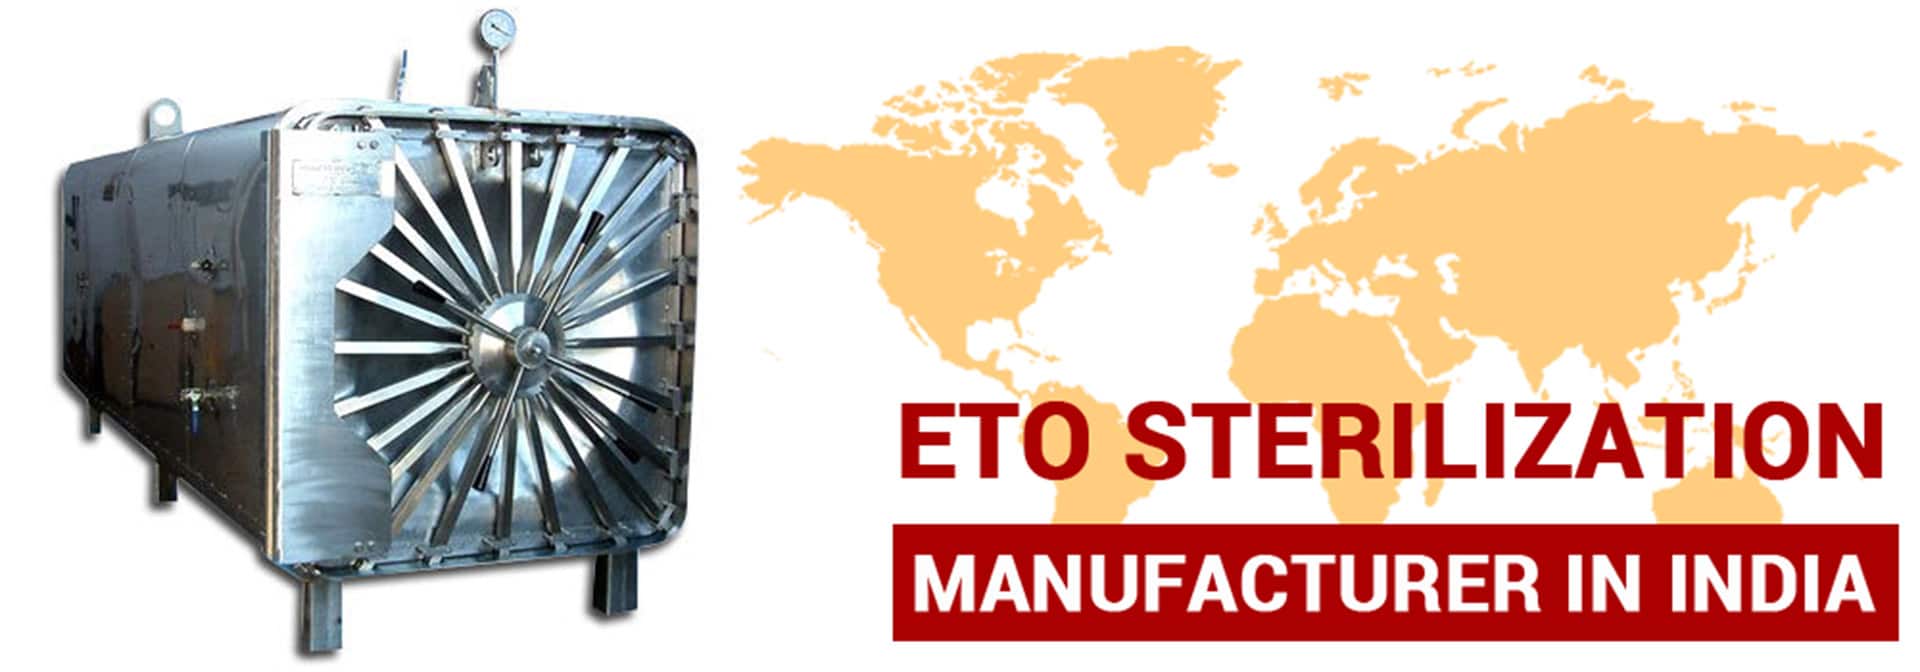 ETO Sterilization Manufacturer, Supplier and Exporter in India